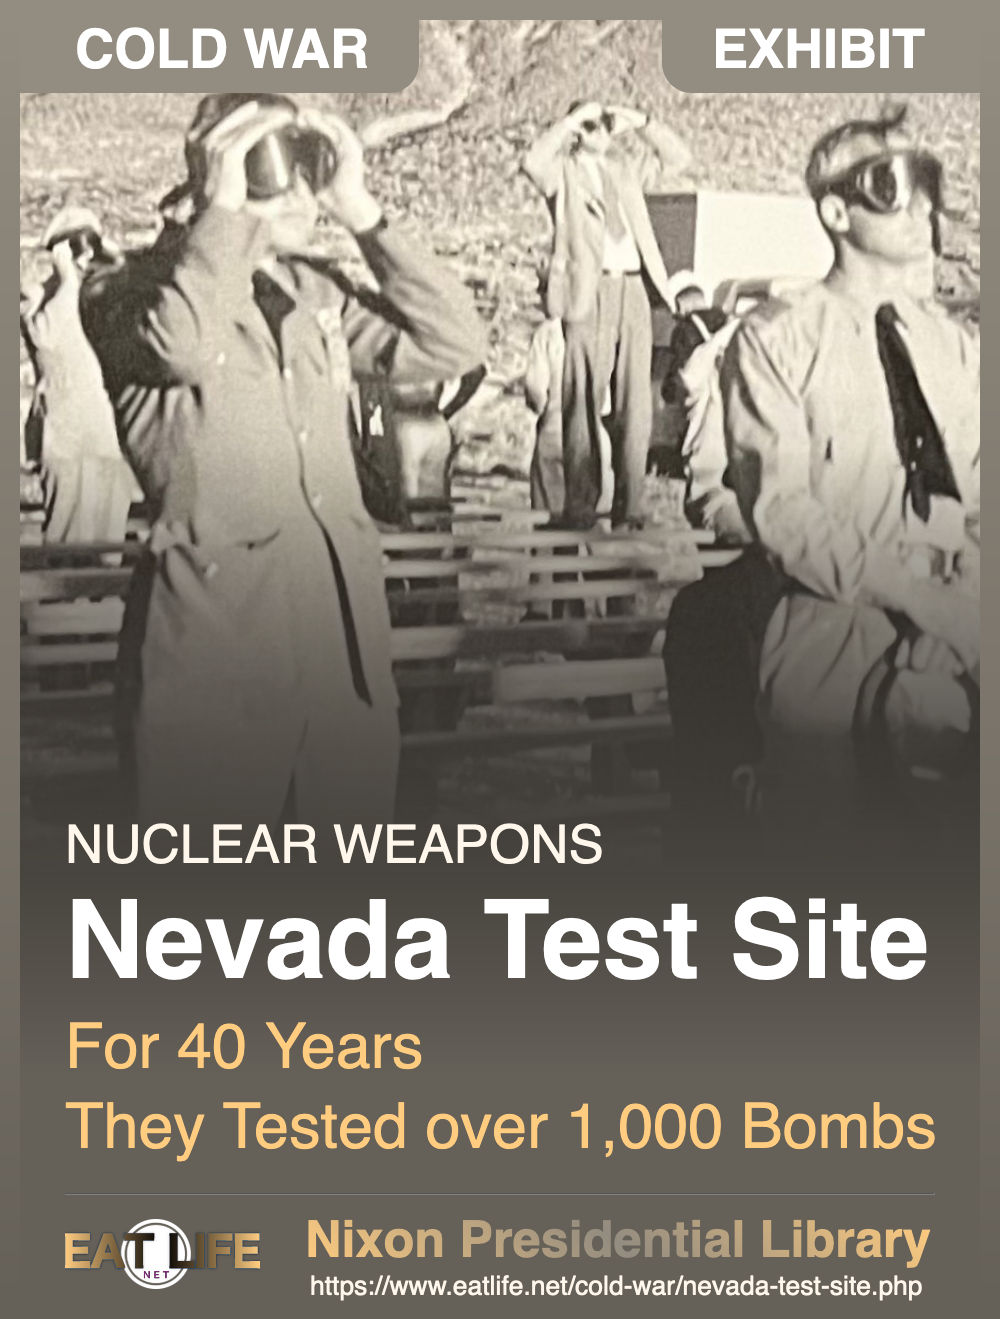 The Nevada Test Site